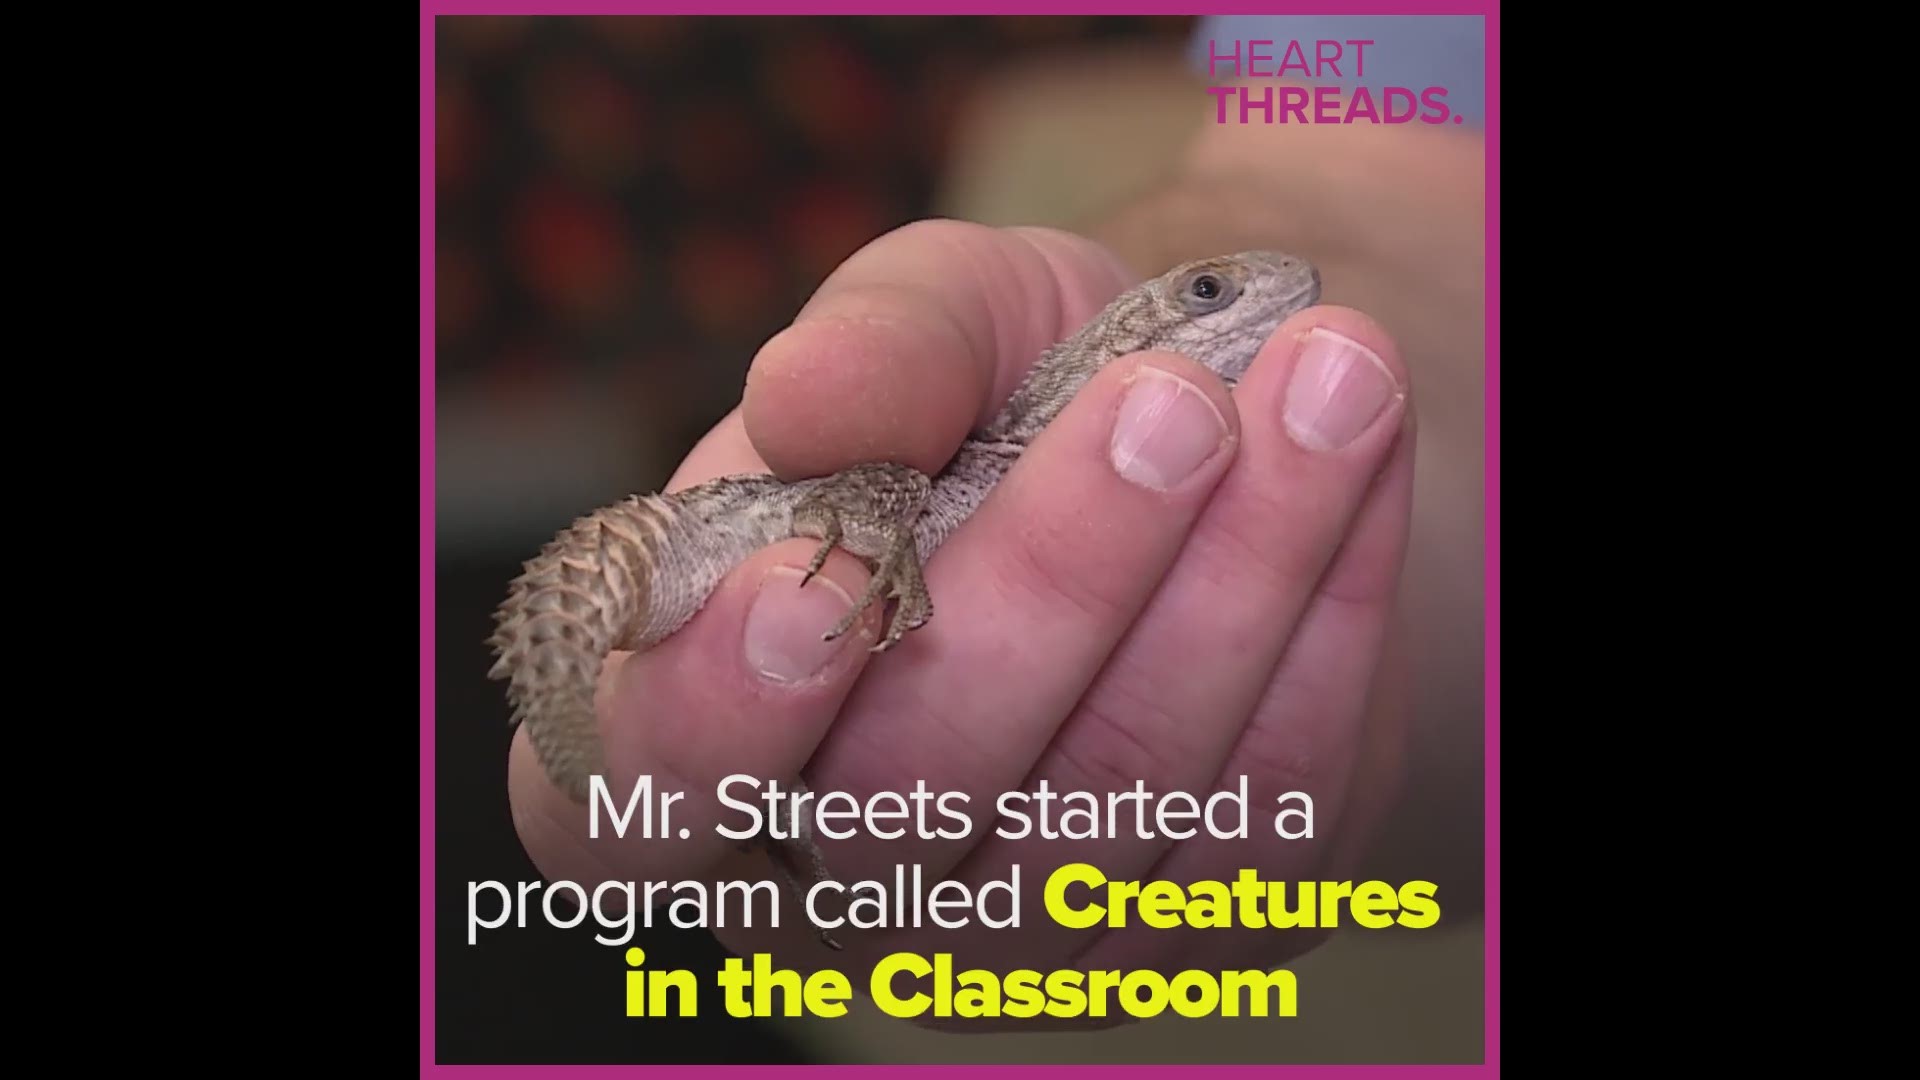 Mr. Streets used his own money to buy animals for the classroom to teach his special ed students about responsibility and empathy.